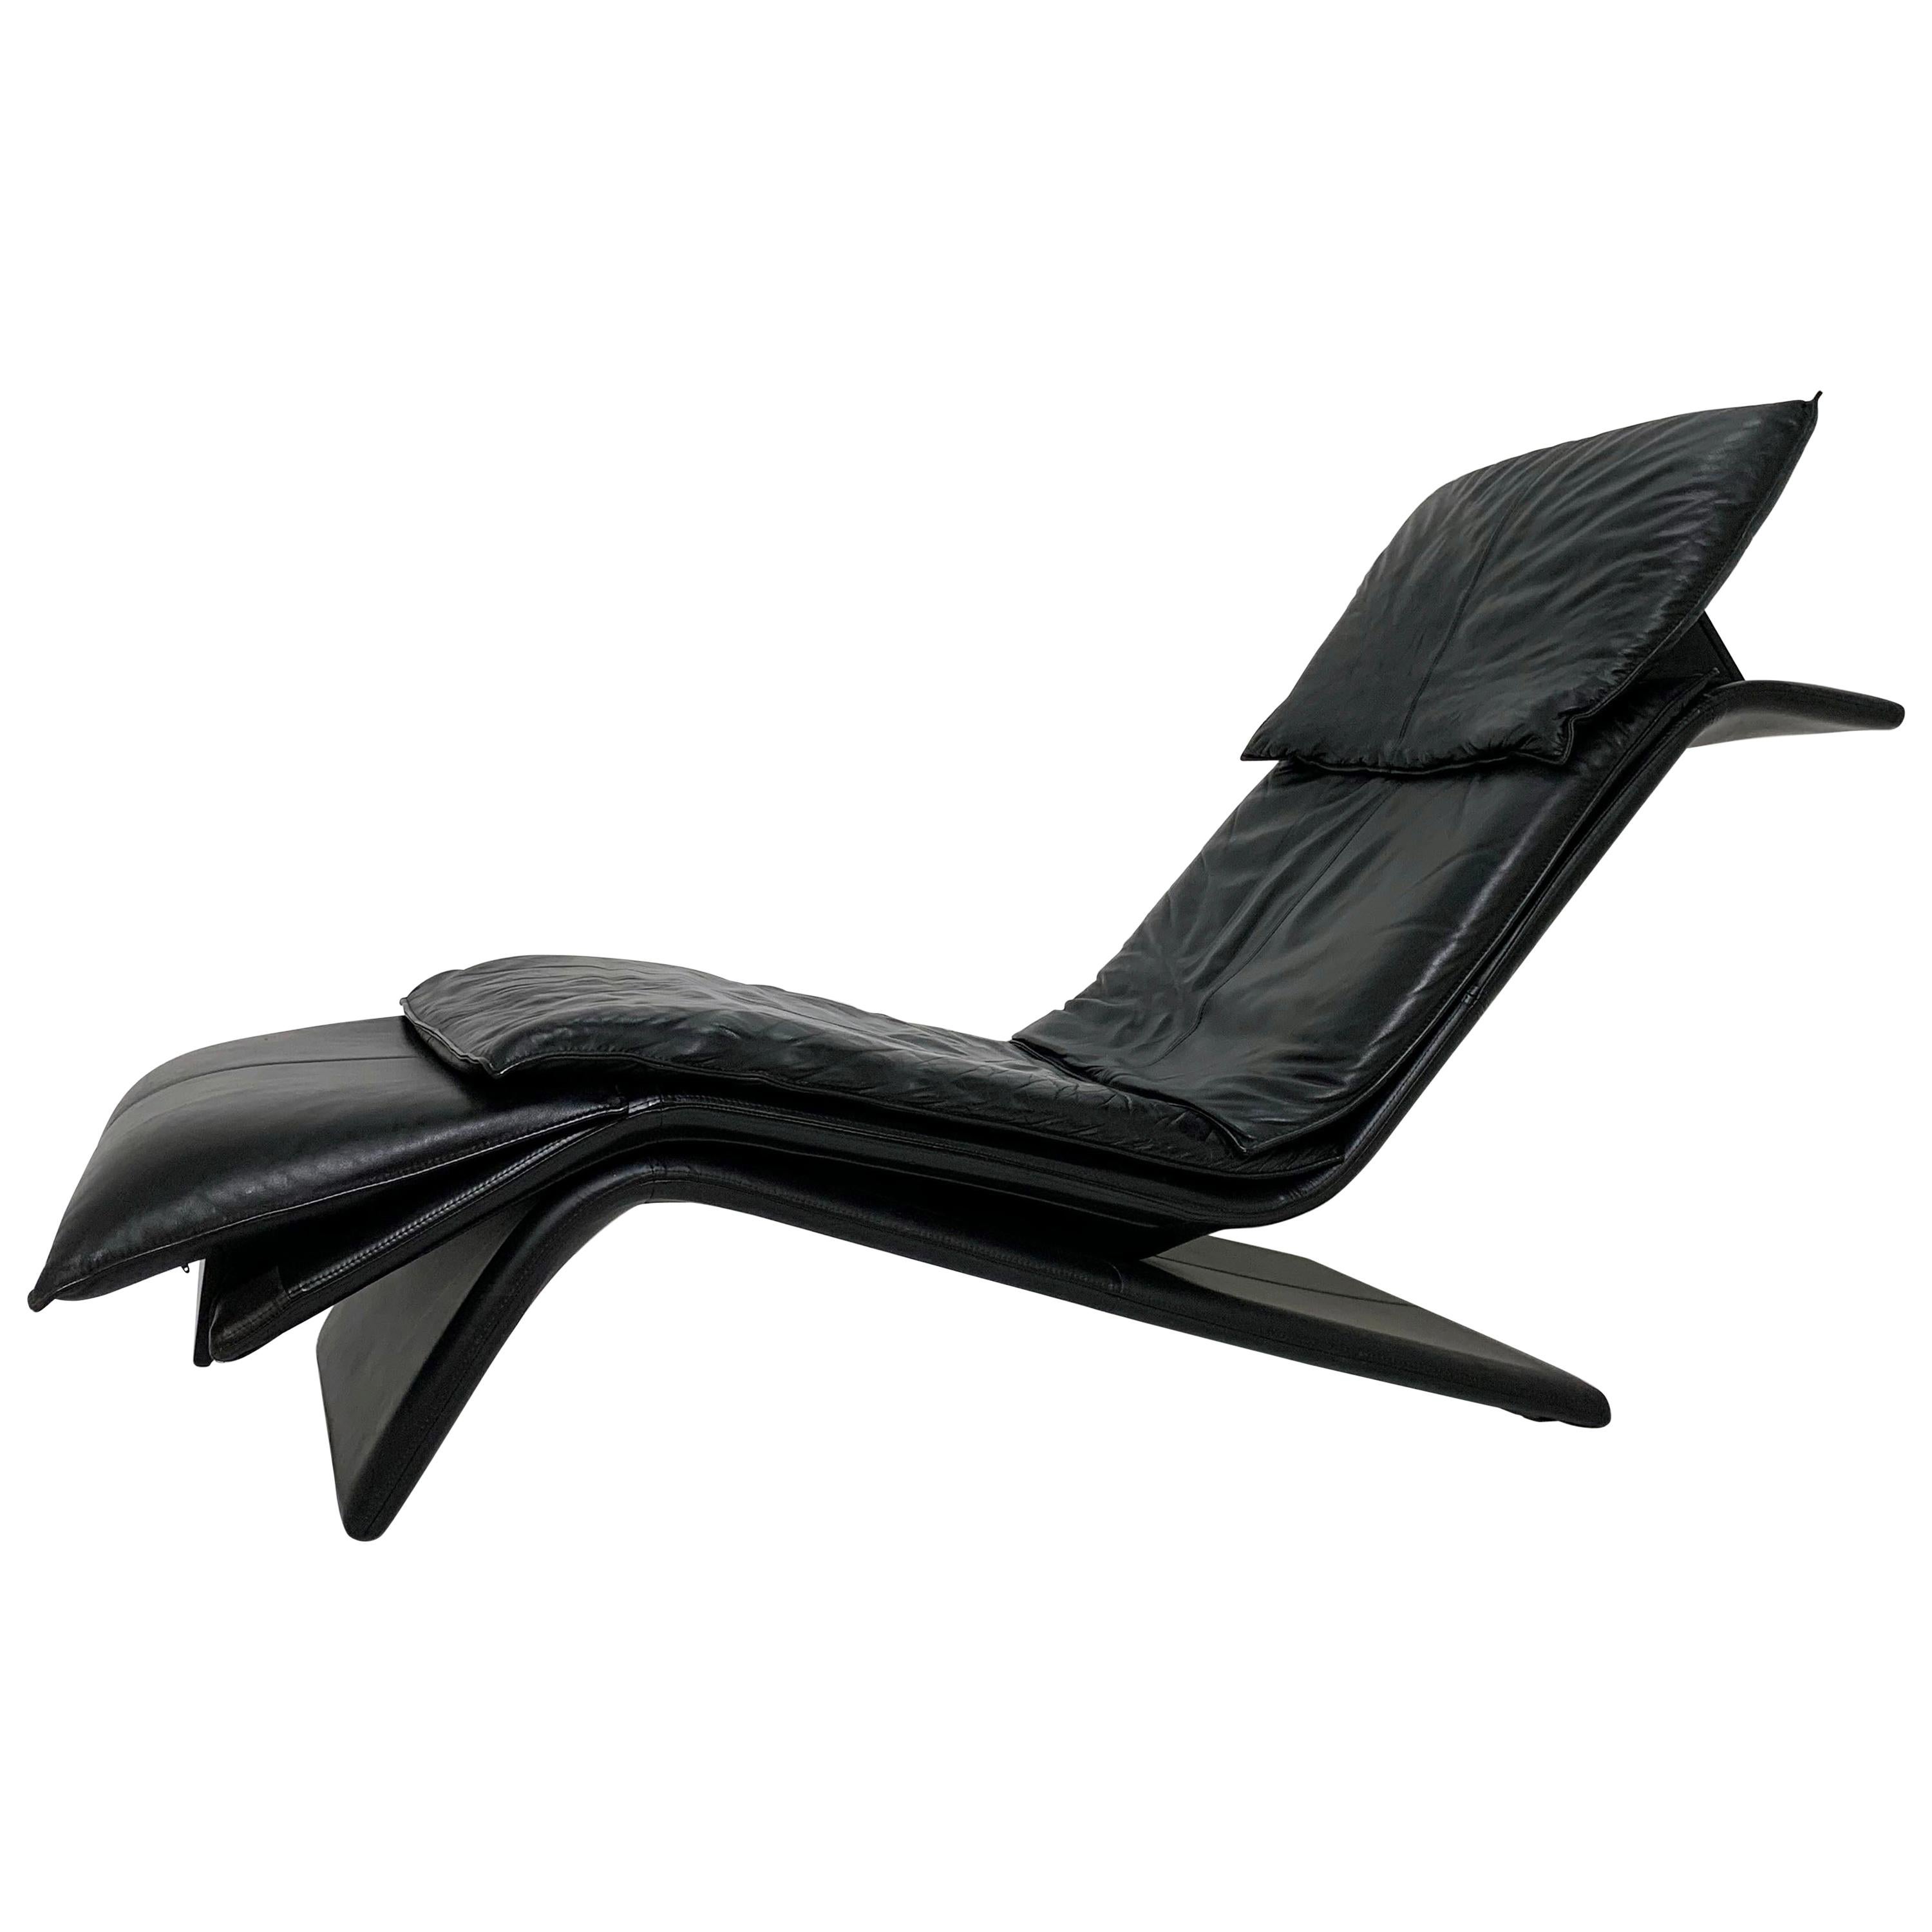 Stylish Postmodern Maurice Villency Leather Chaise, circa 1980s For Sale